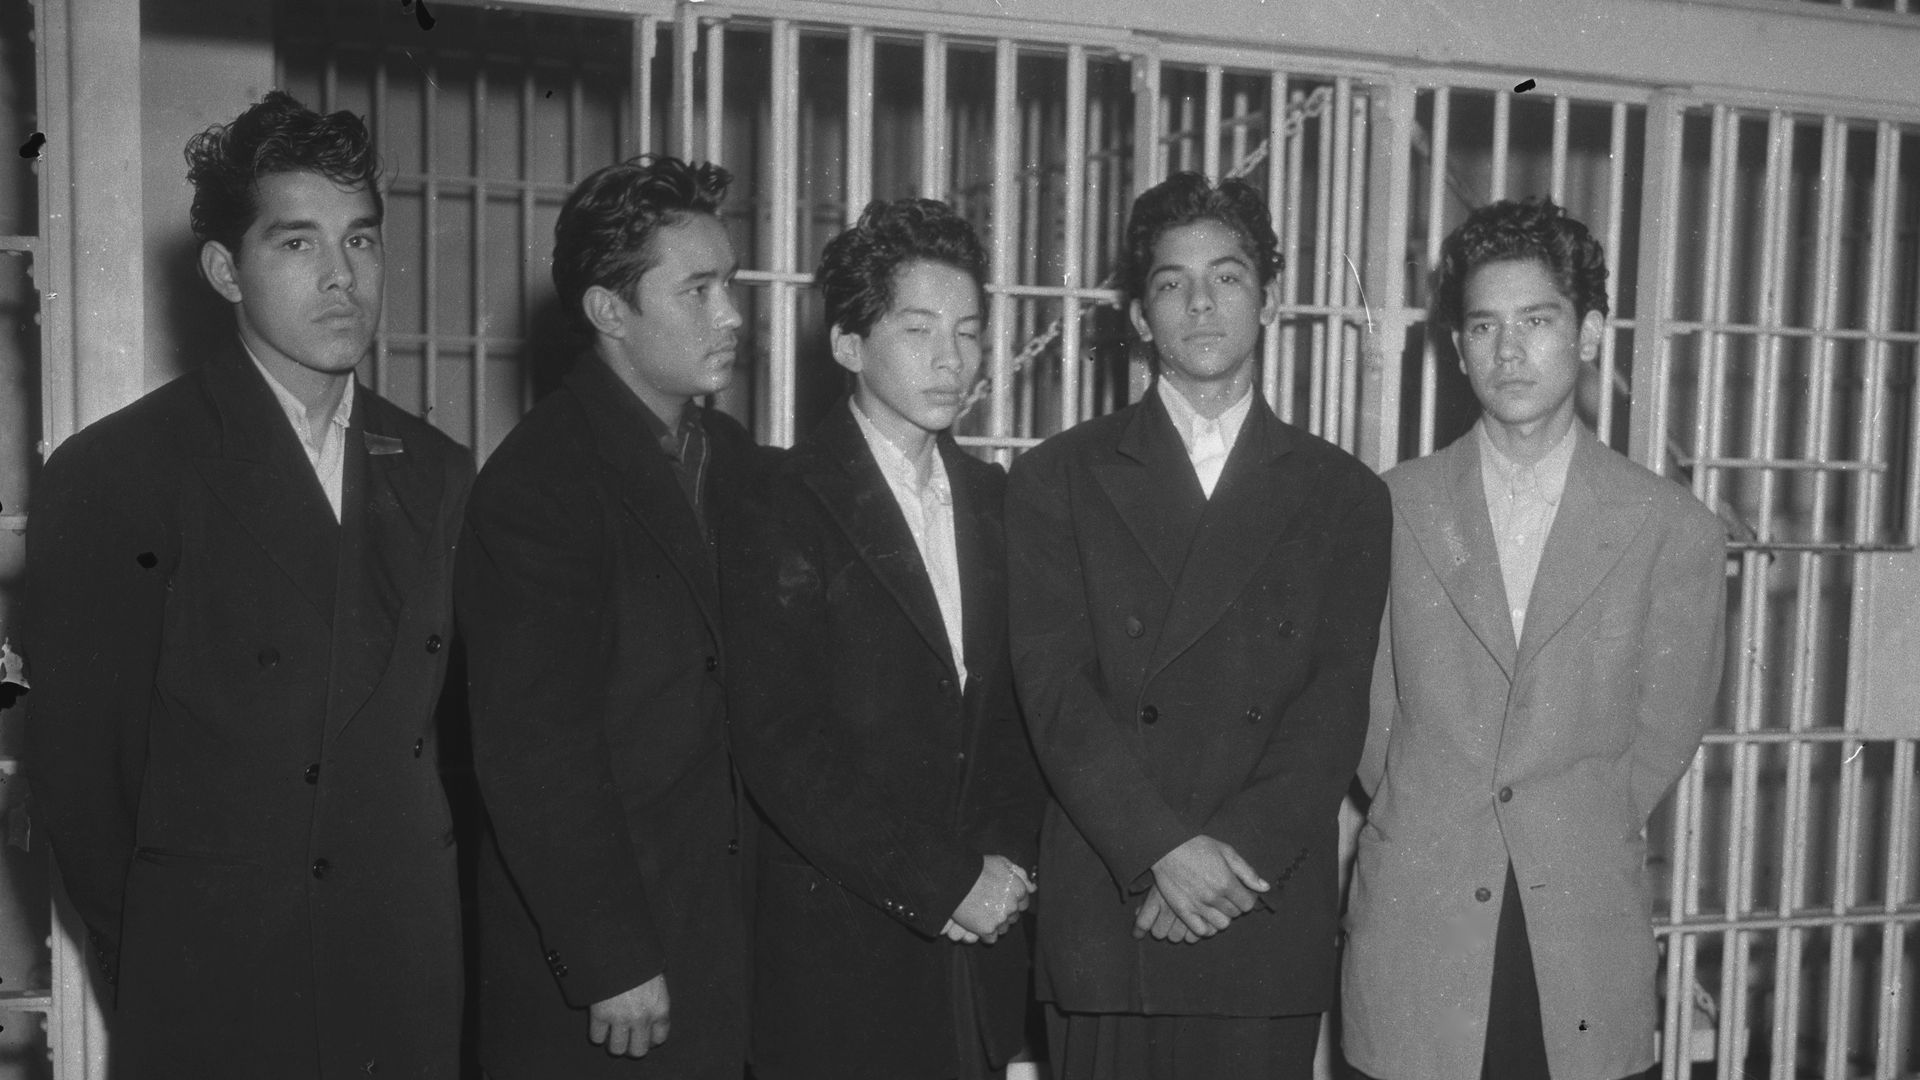 Mexican American zoot suiters lined up outside Los Angeles jail in 1943.